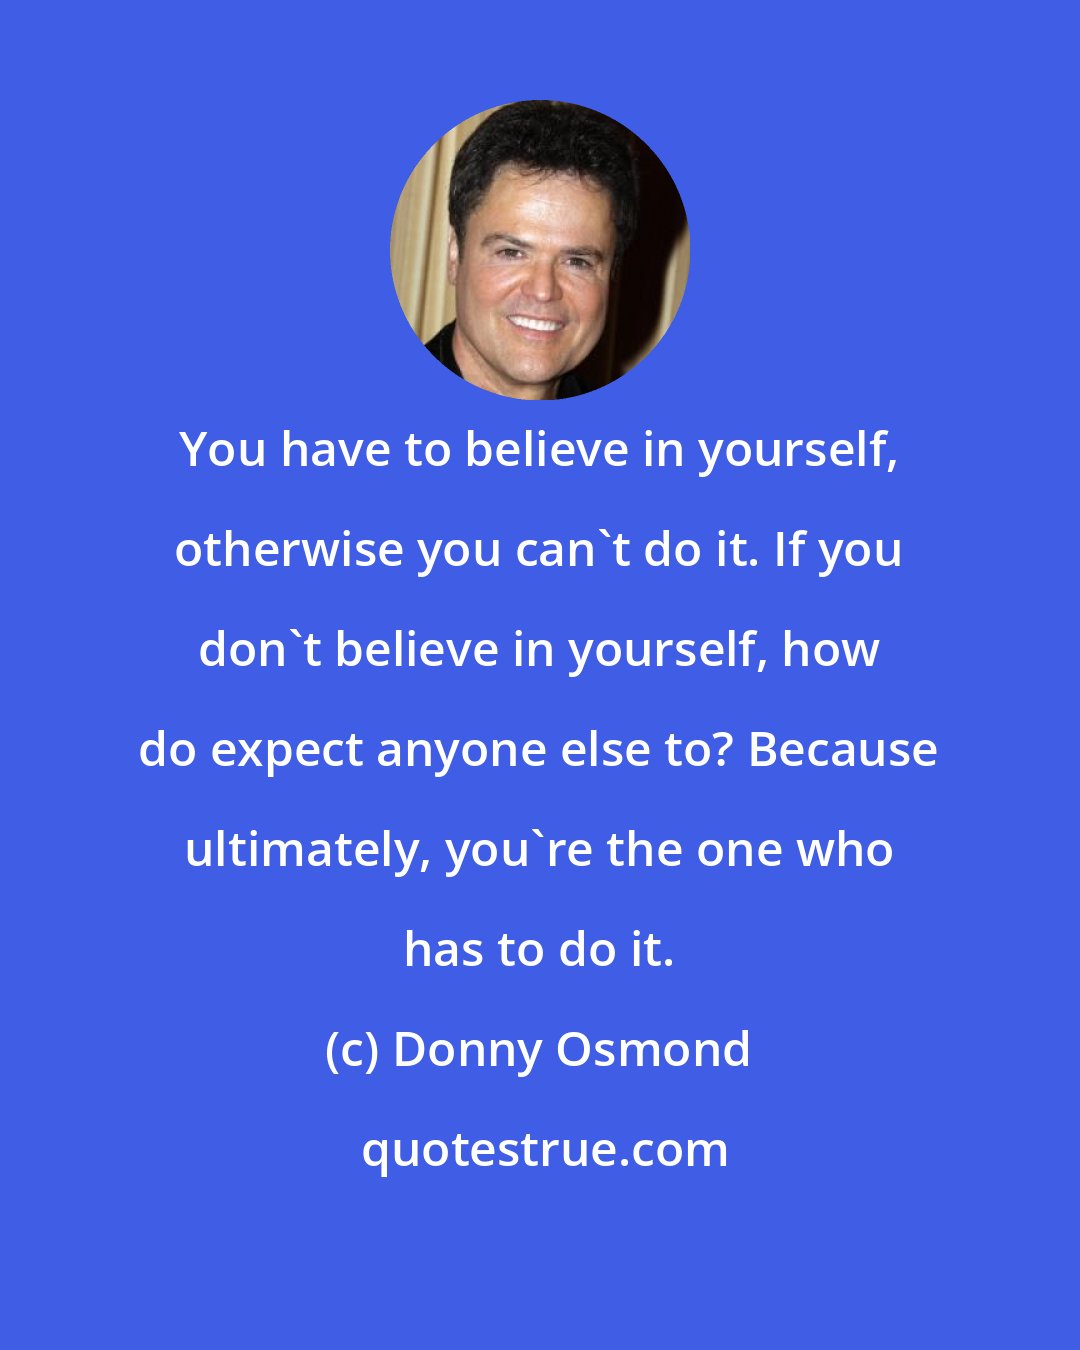 Donny Osmond: You have to believe in yourself, otherwise you can't do it. If you don't believe in yourself, how do expect anyone else to? Because ultimately, you're the one who has to do it.